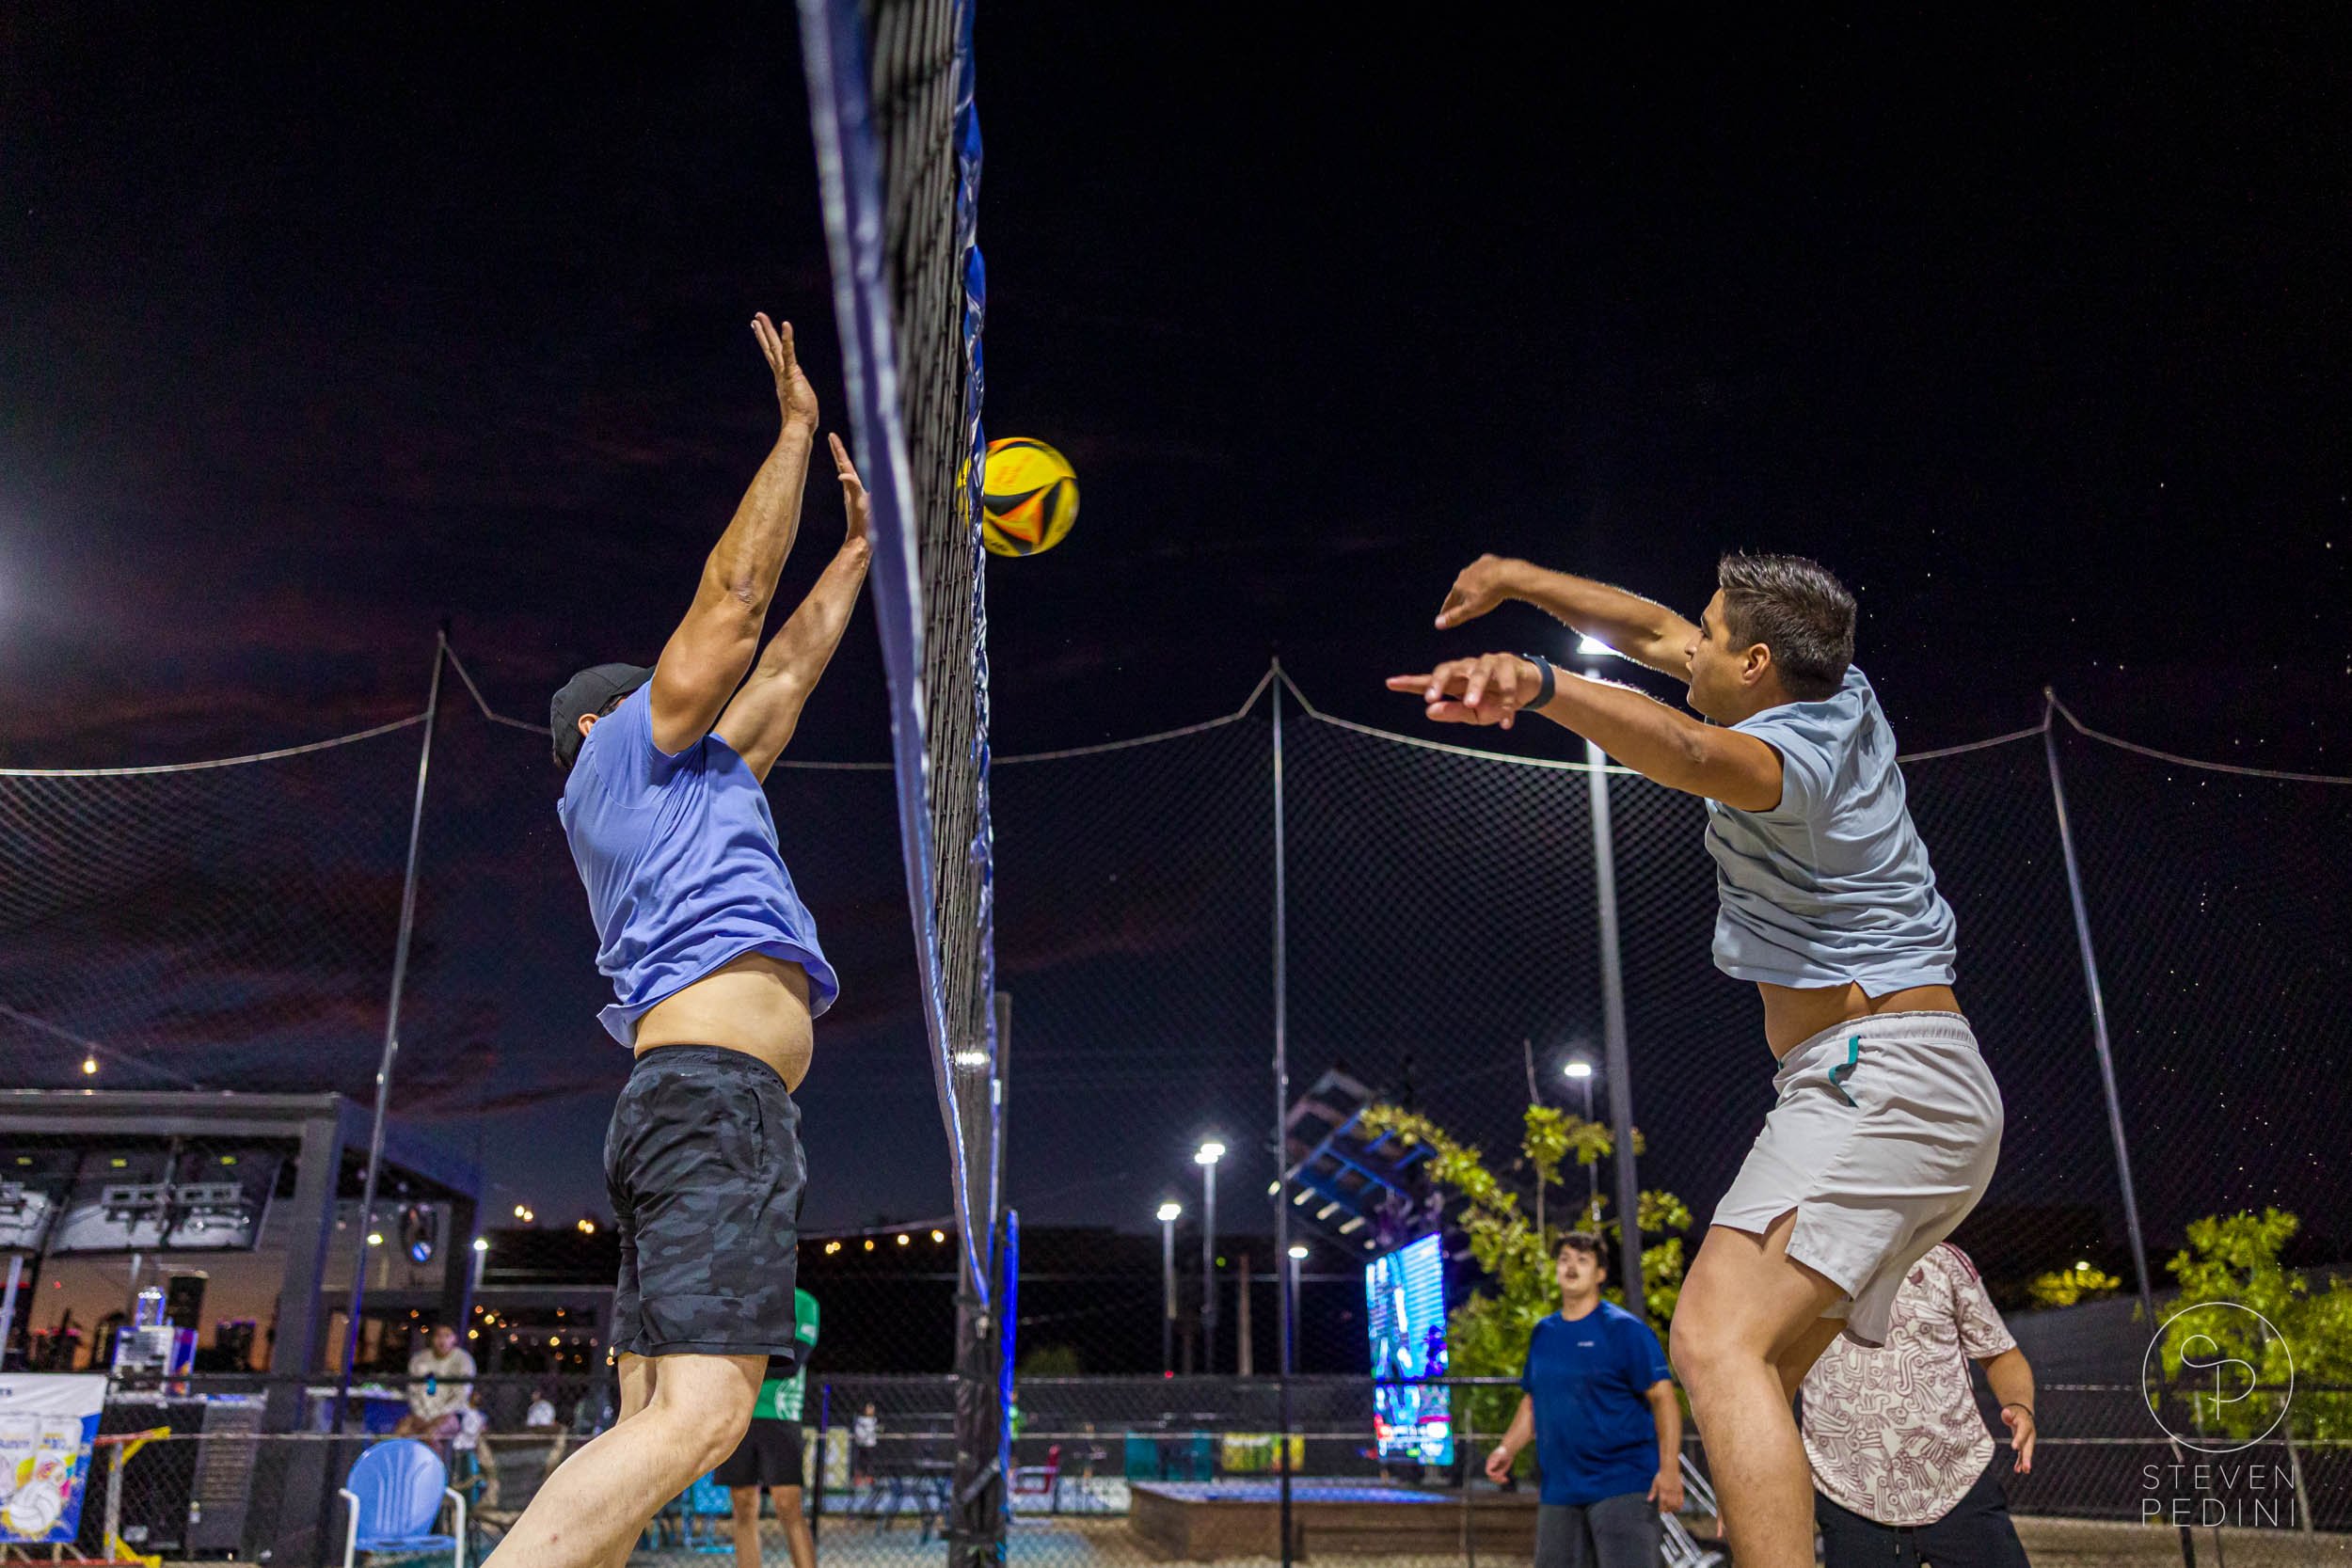 Steven Pedini Photography - Bumpy Pickle - Sand Volleyball - Houston TX - World Cup of Volleyball - 00375.jpg